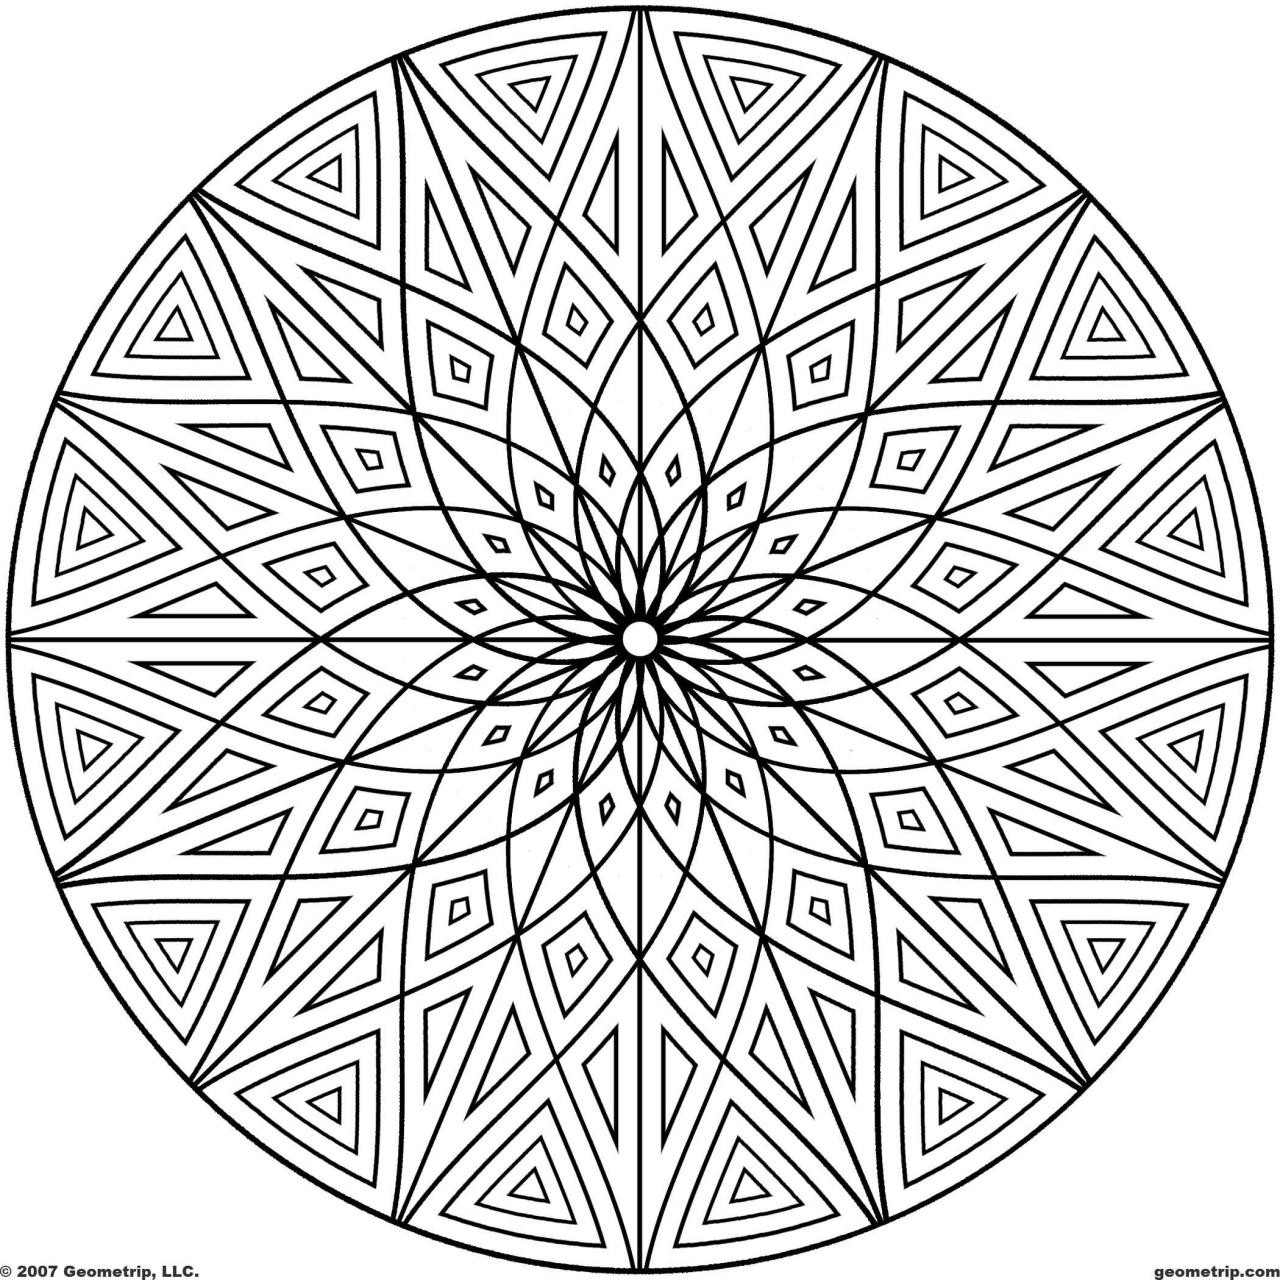 Design Coloring Pages
 Coloring Design Page Geometric Patterns Coloring Page For